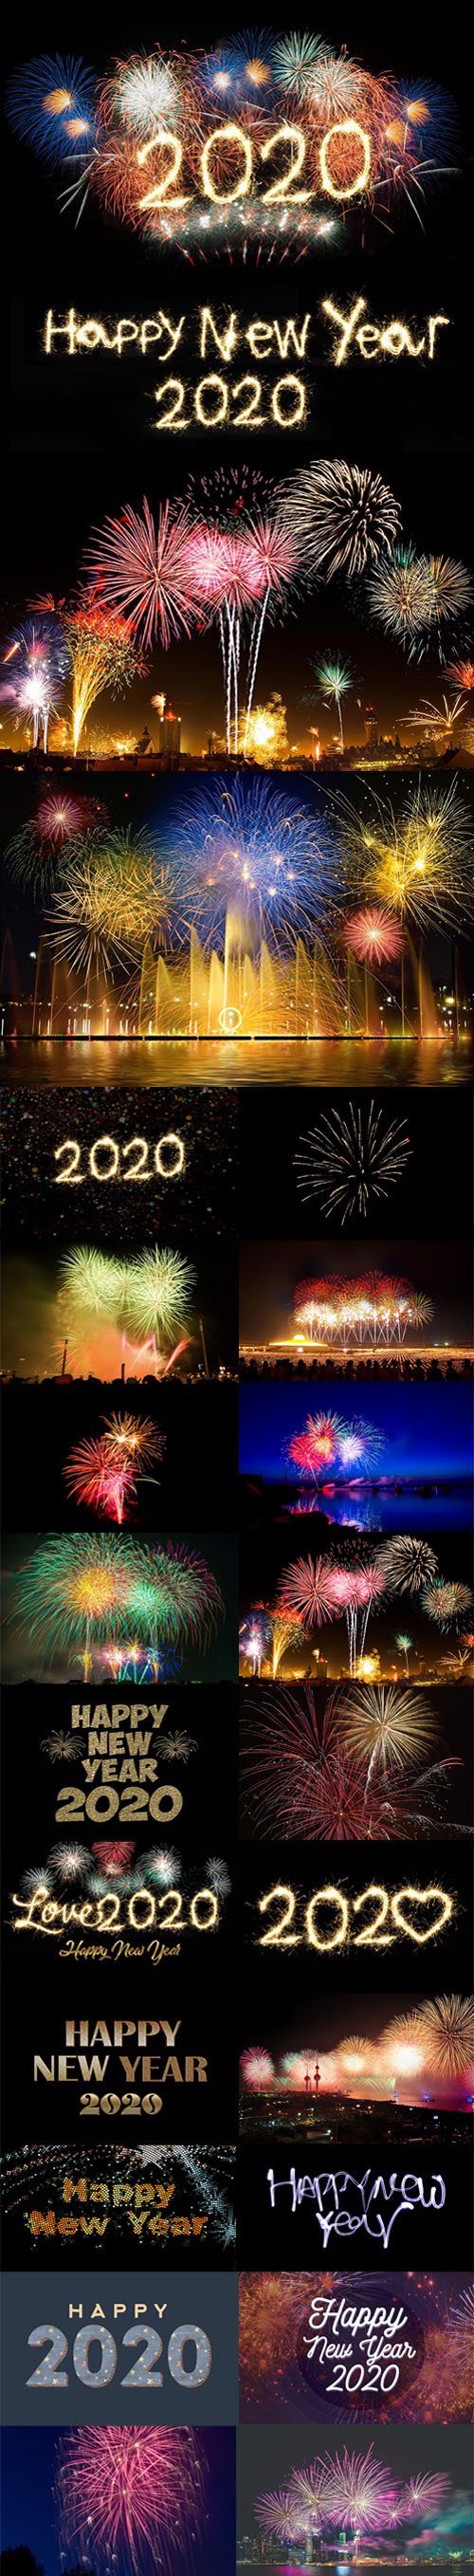 30 Happy New Year 2020 Stock Photos & Wallpapers HD